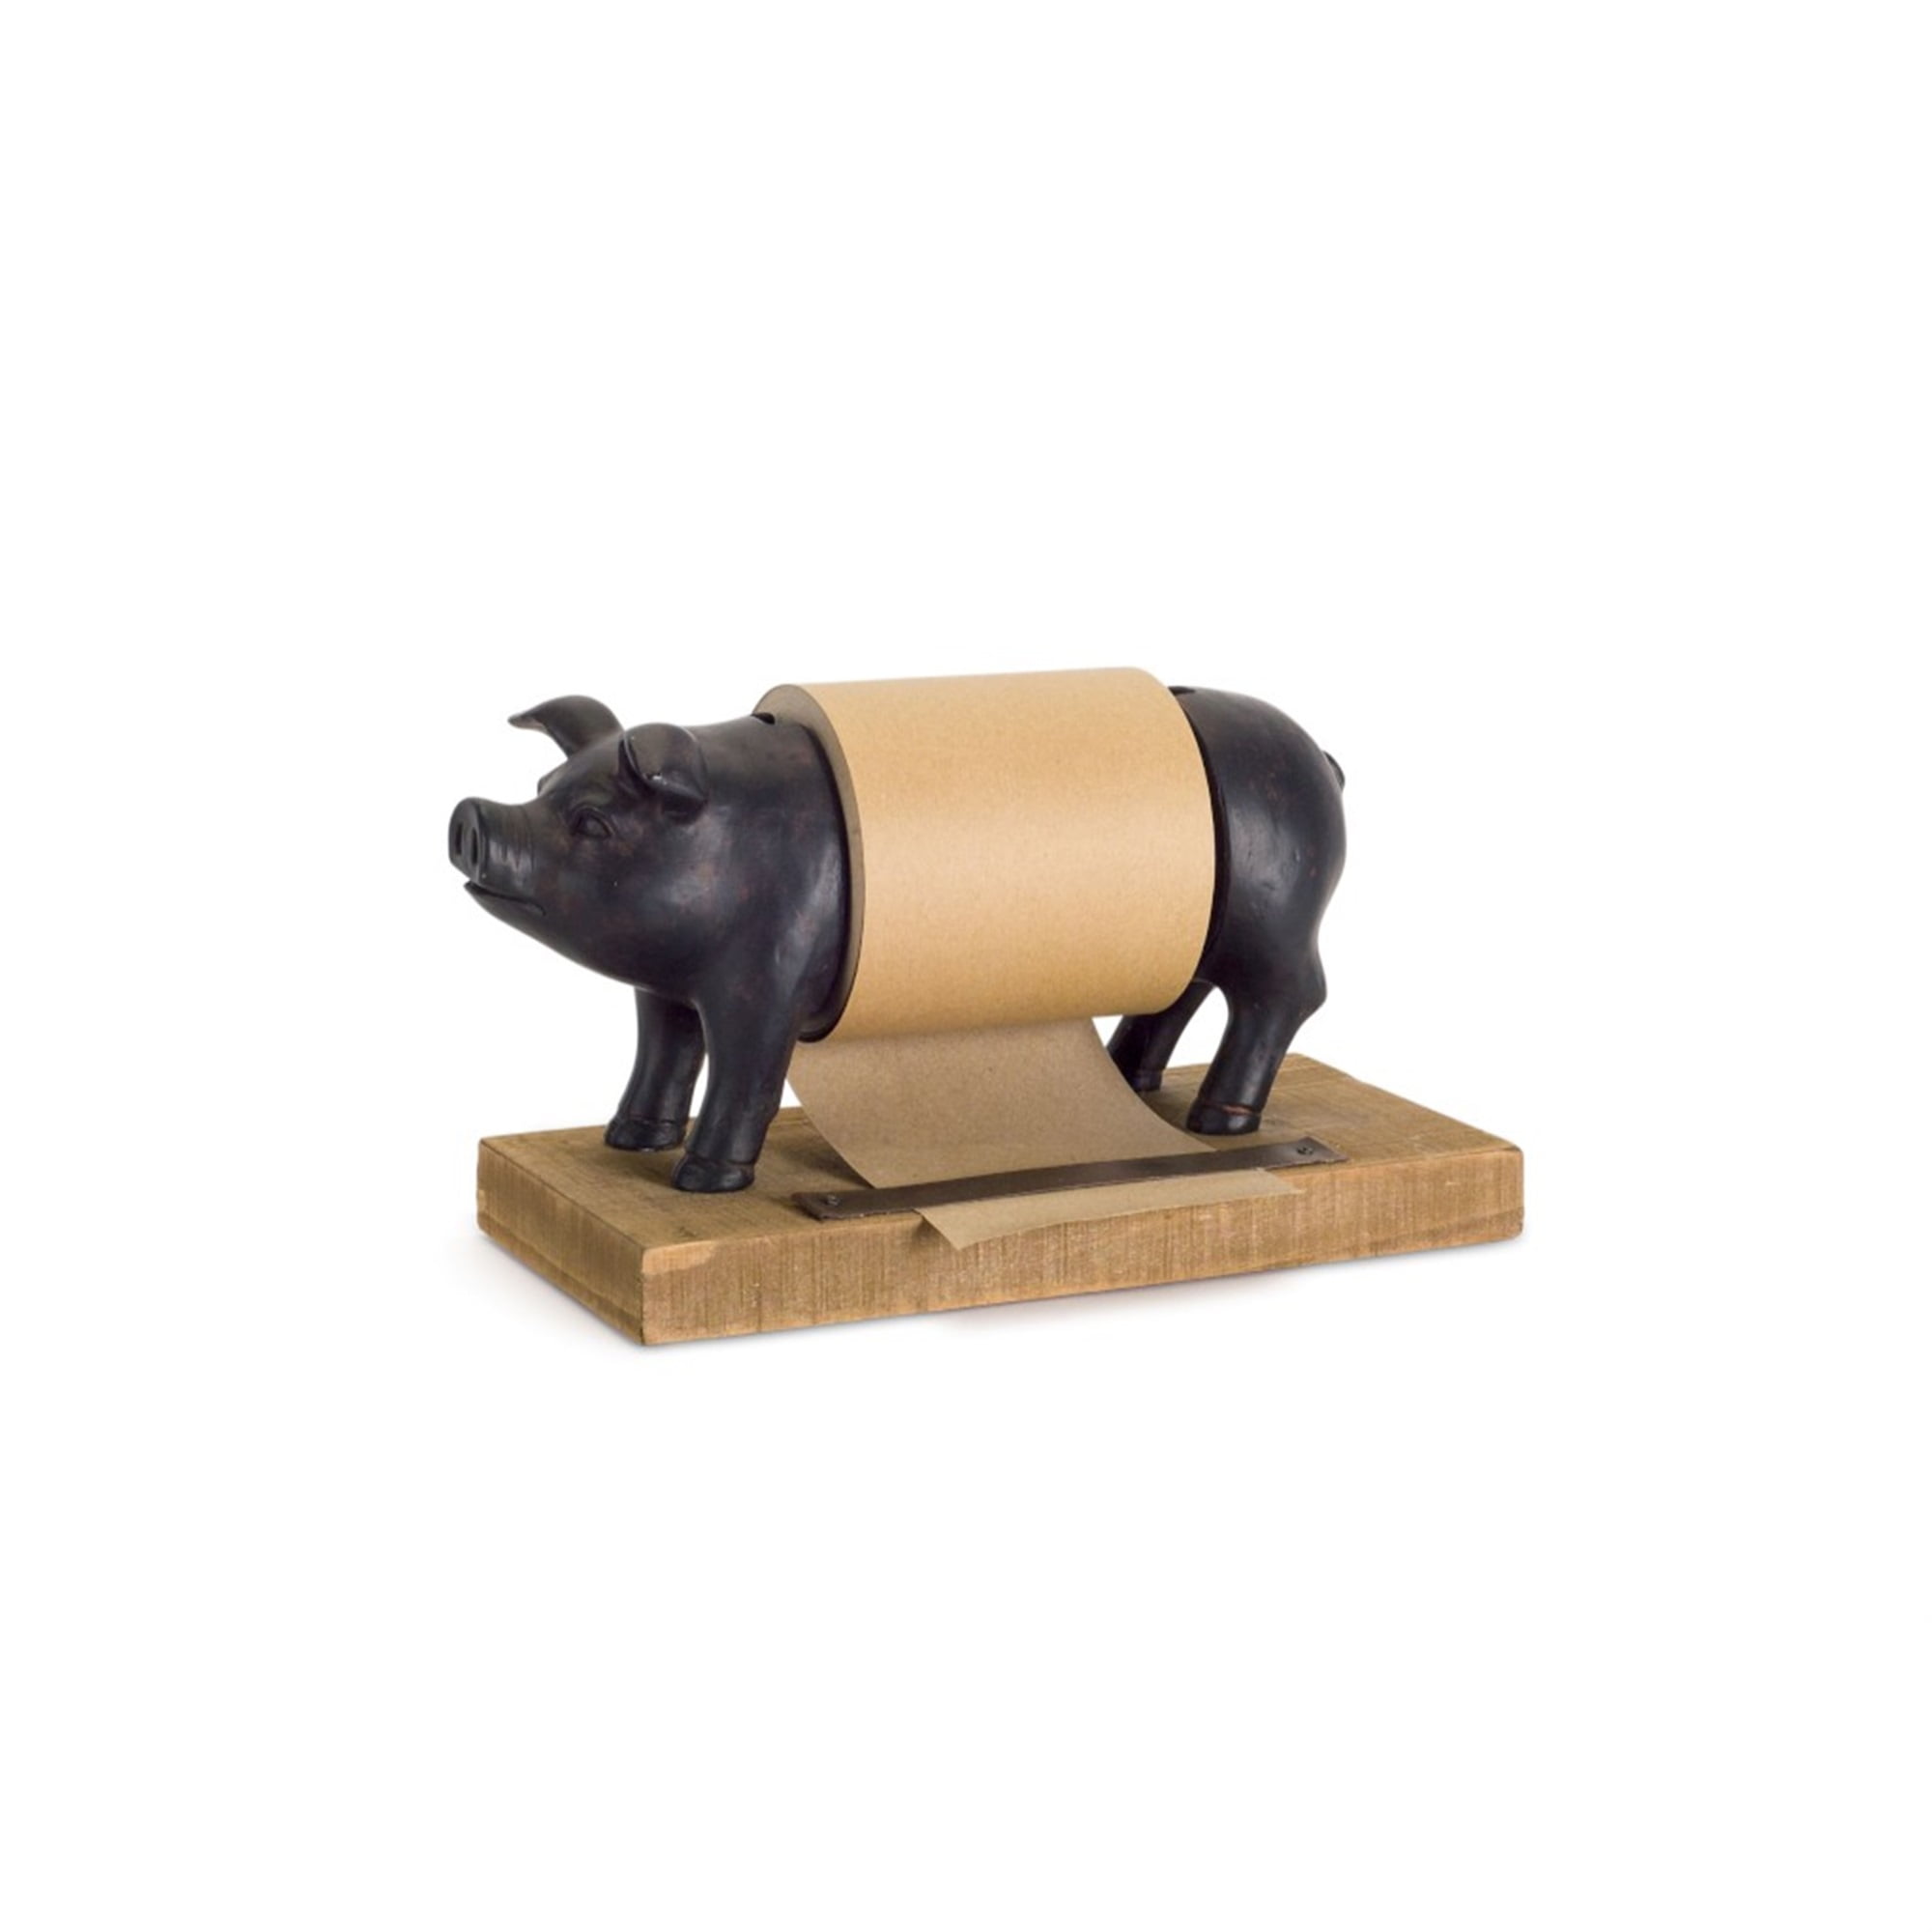 Pig Paper Roll 10" x 6.25"H Resin